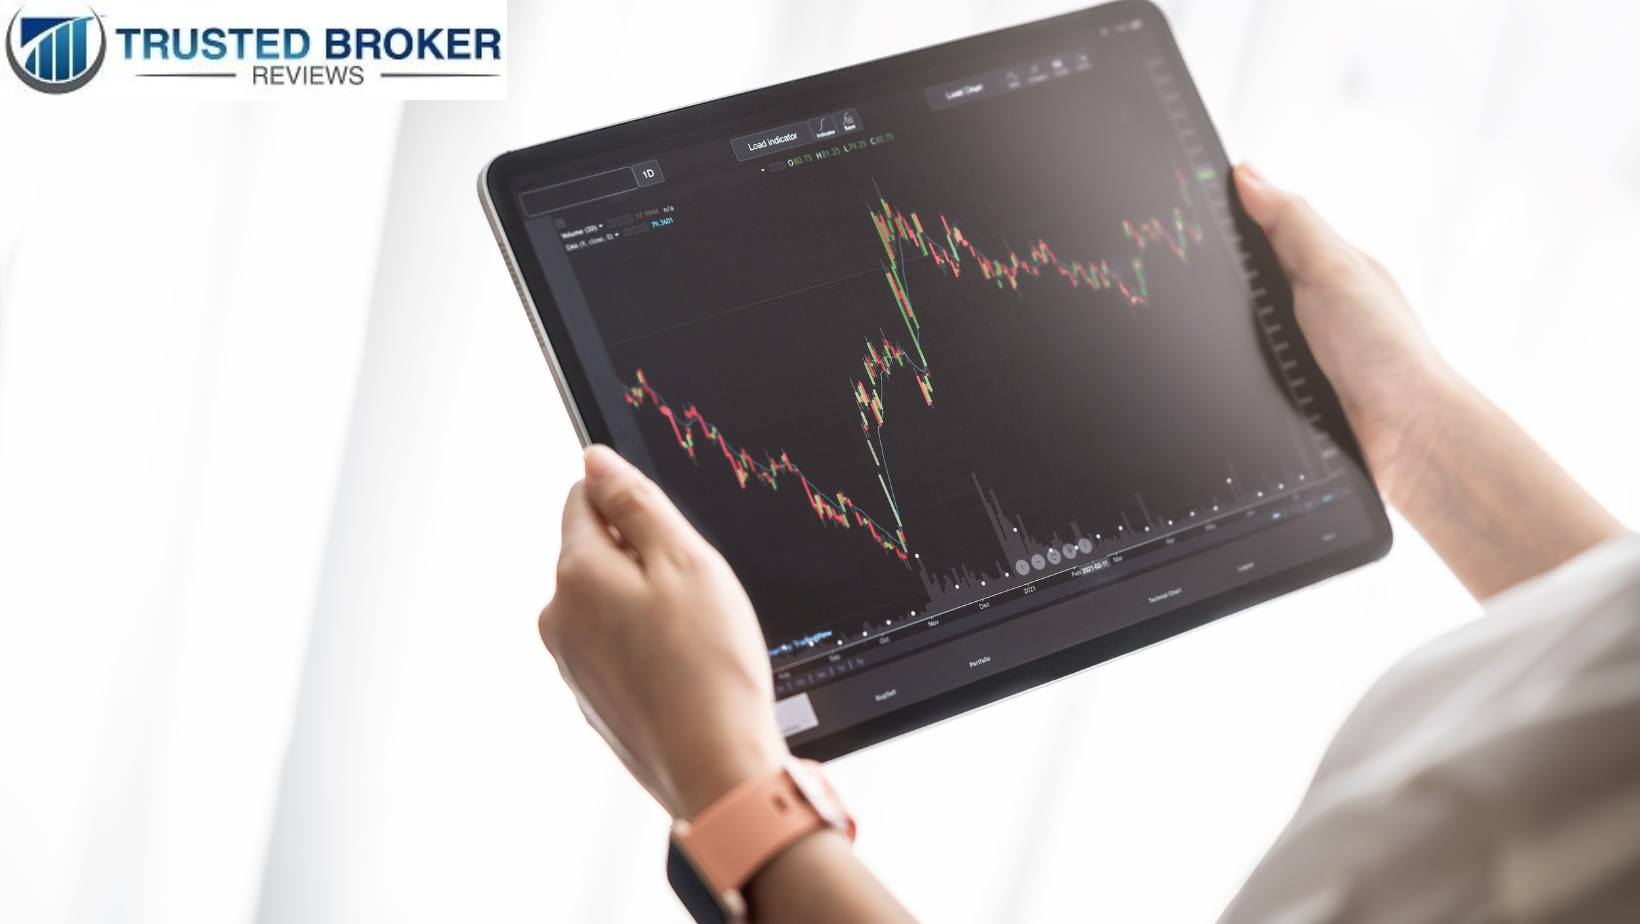 Forex chart analysis on a tablet